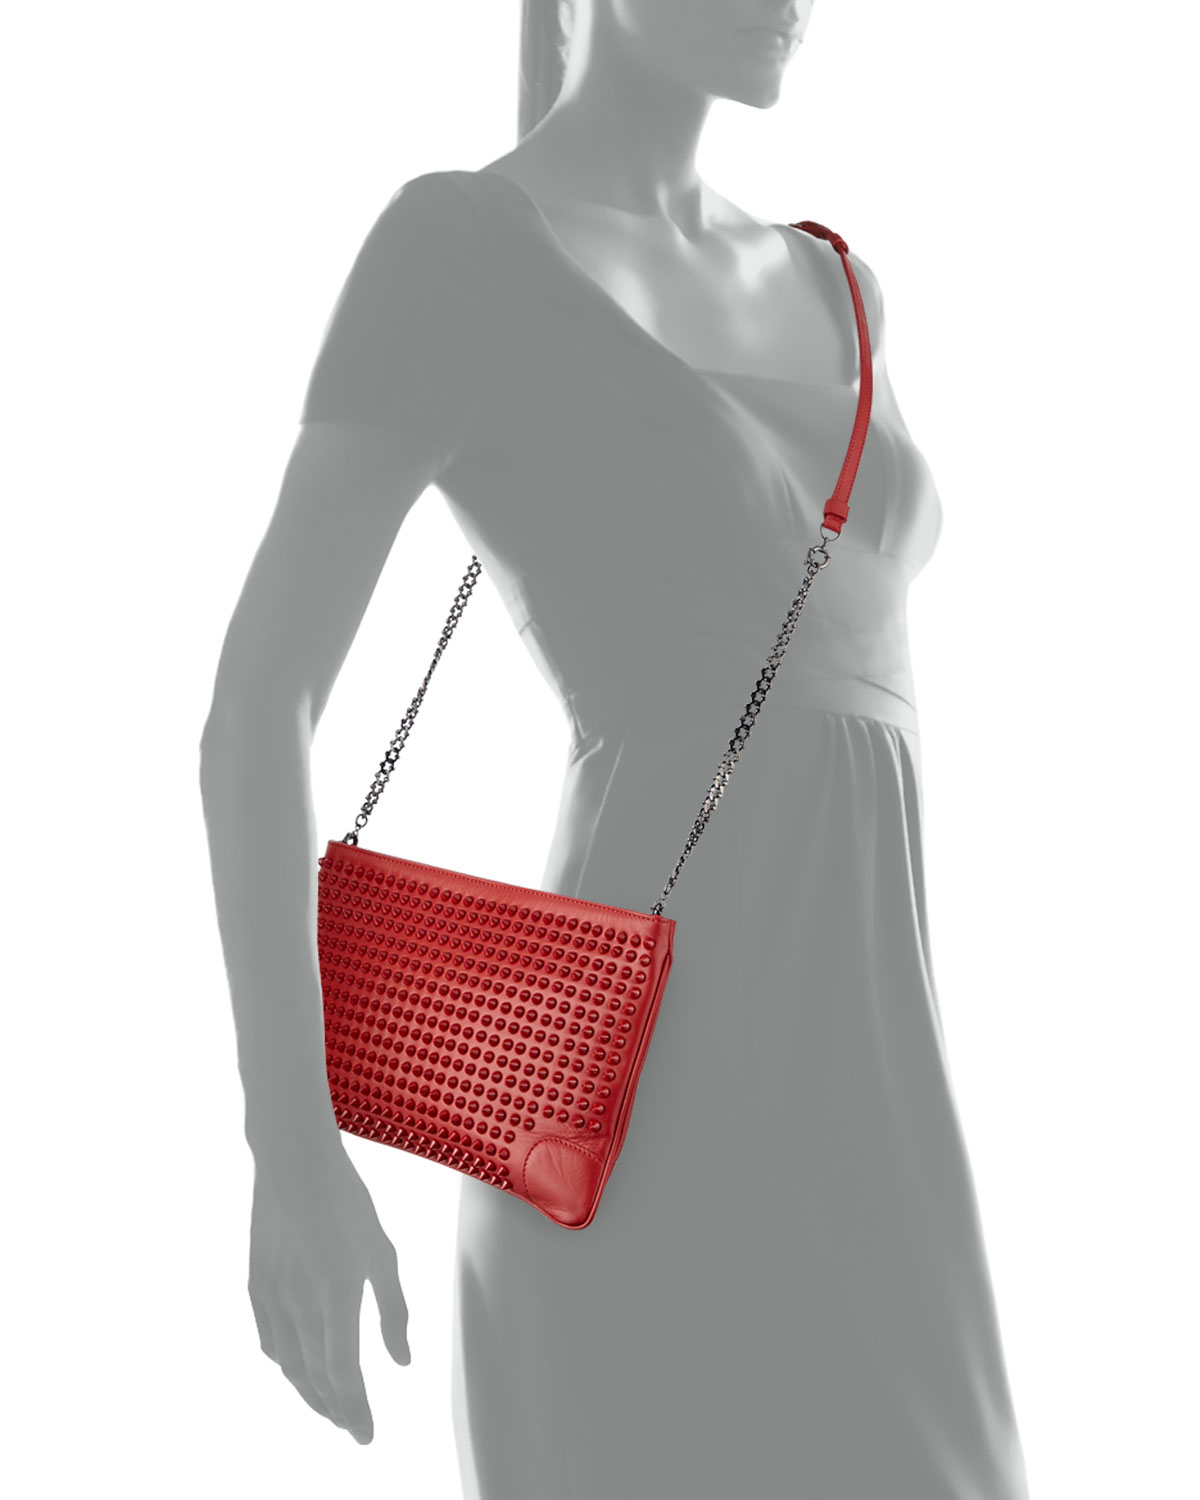 Lyst - Christian Louboutin Loubiposh Studded Clutch Bag in Red